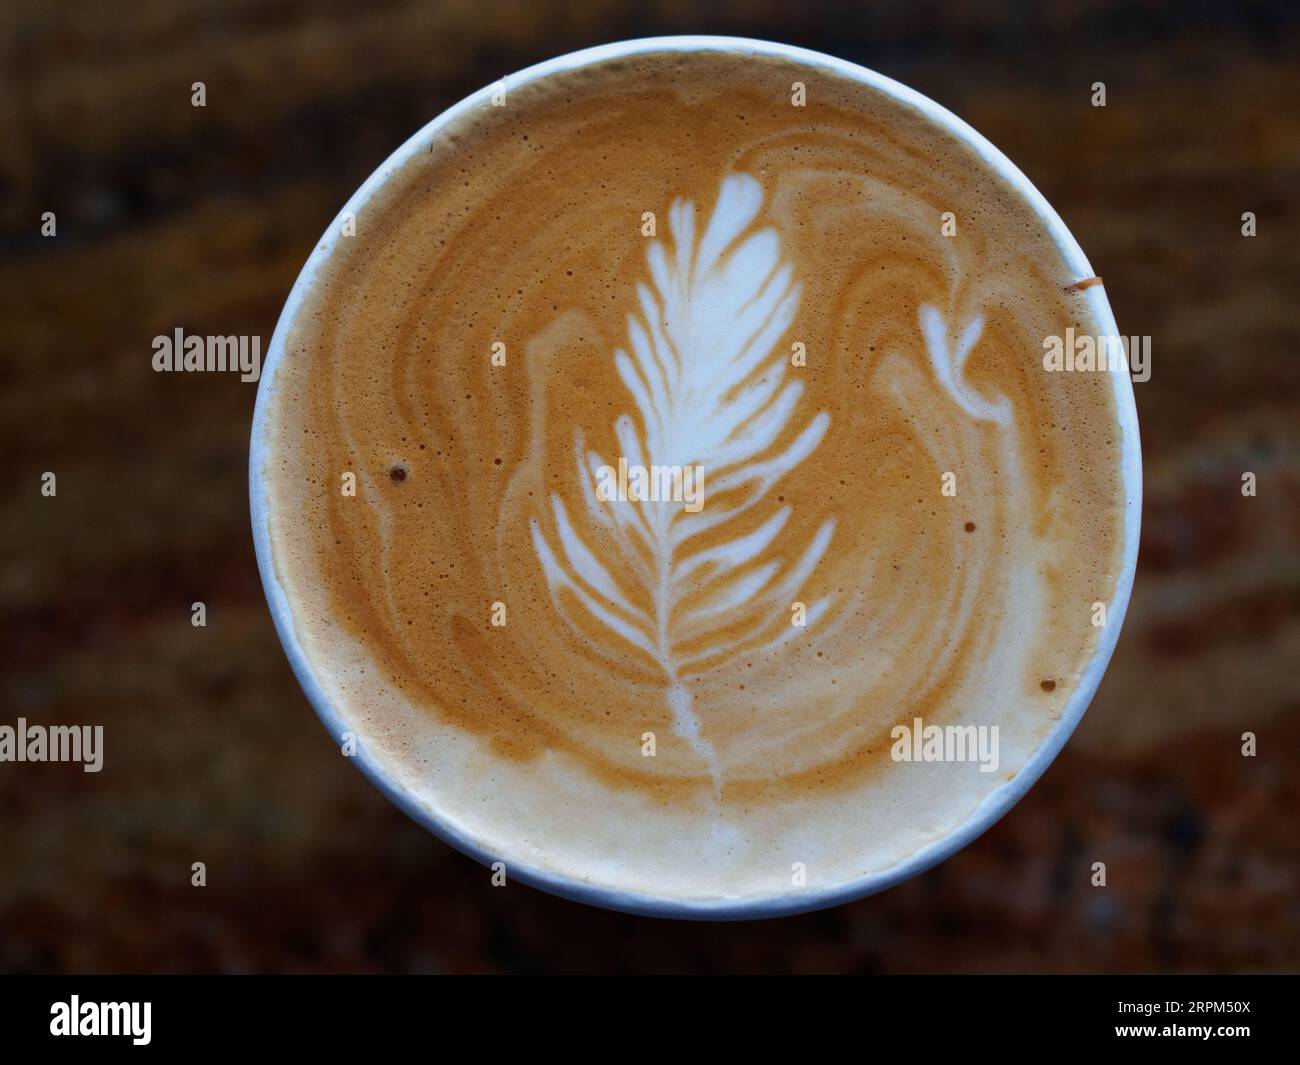 A close-up of a take away cappuccino. Stock Photo